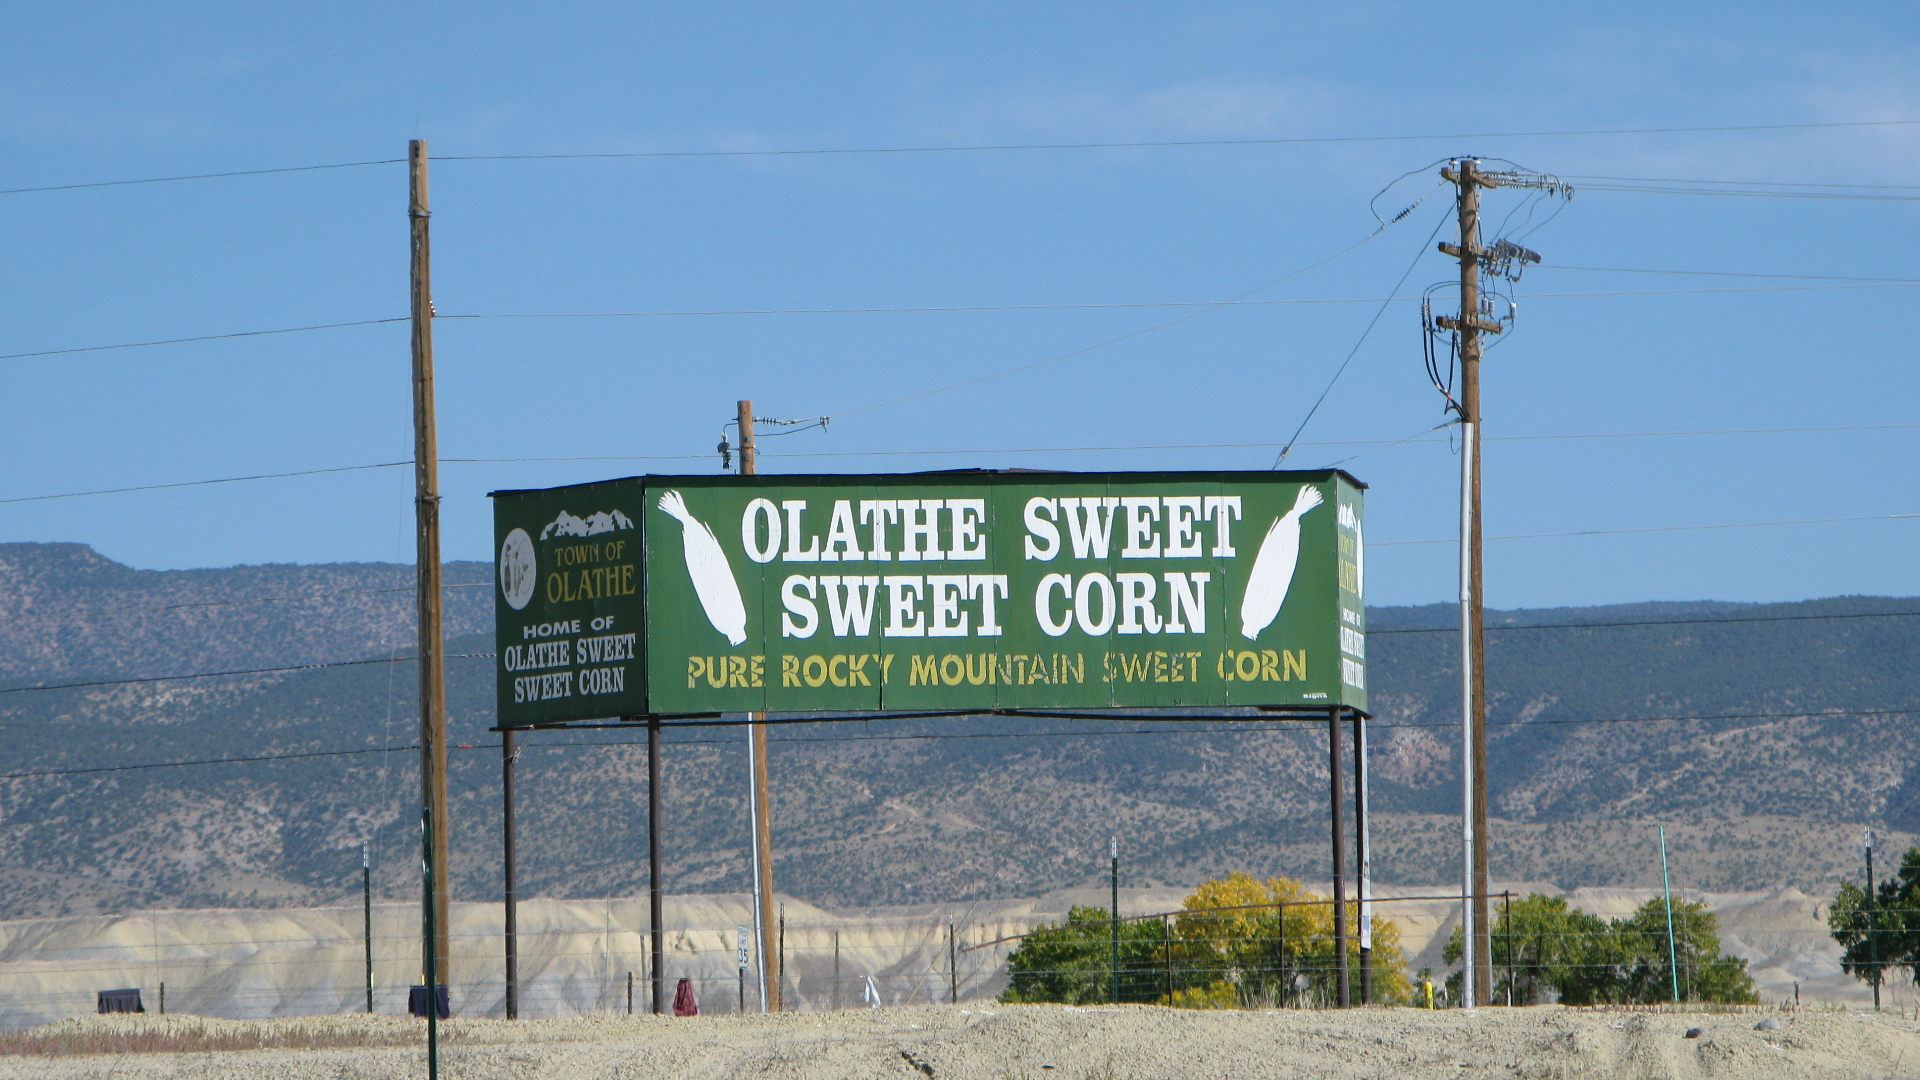 Olathe is a Colorado town about 15 minutes north of Montrose. It's known for growing sweet corn and confusing outsiders with the pronunciation of the town's name